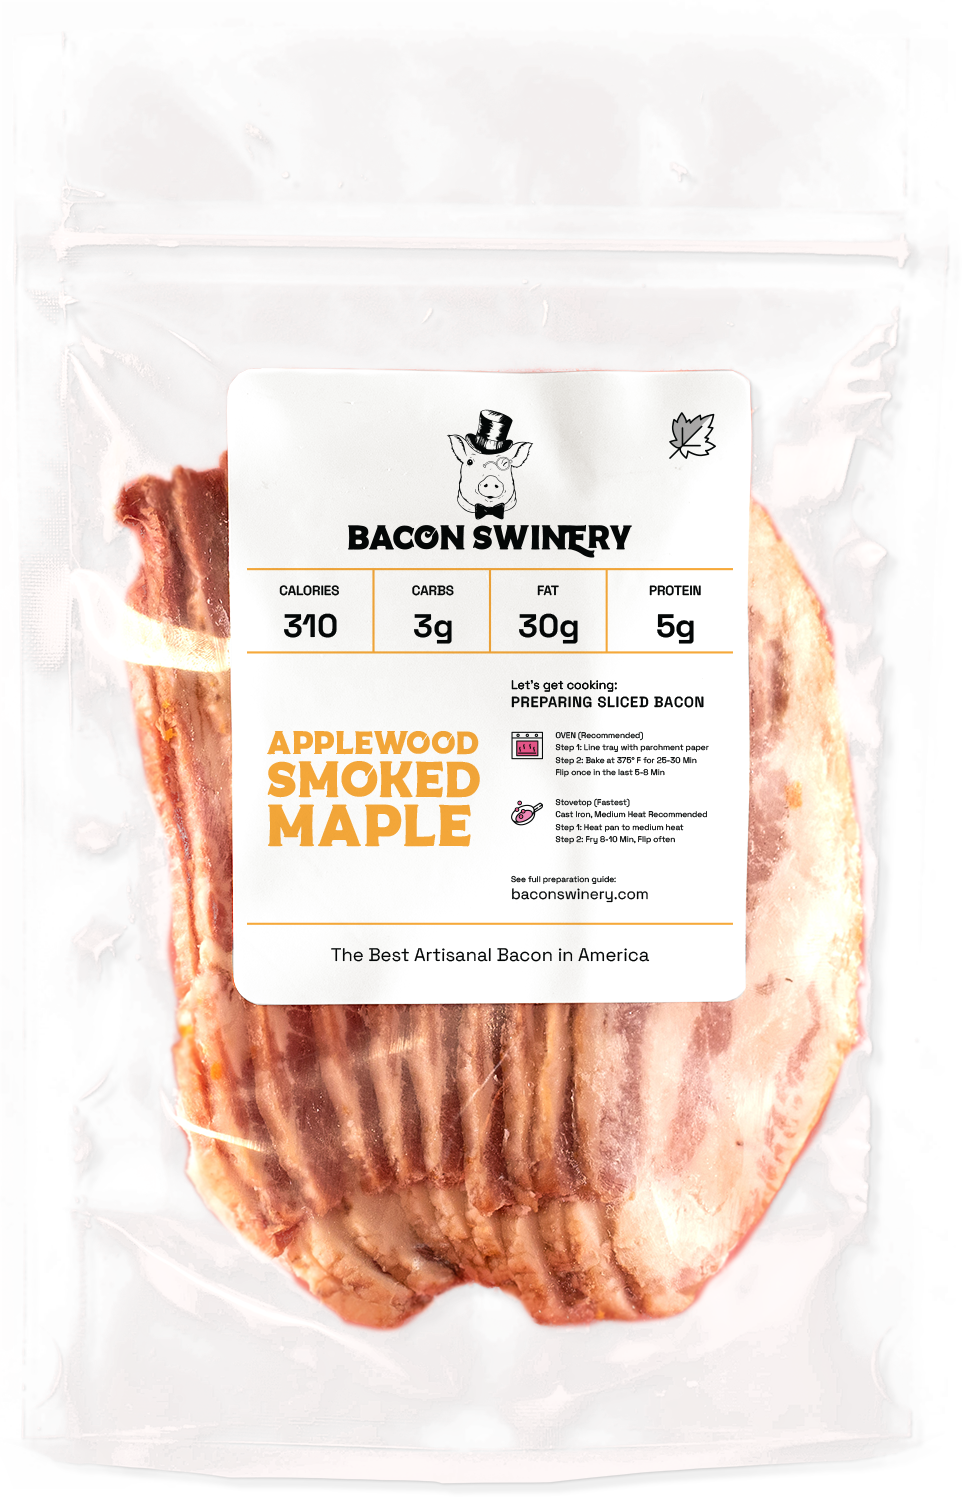 A Whole Bunch of Applewood Smoked Maple Bacon